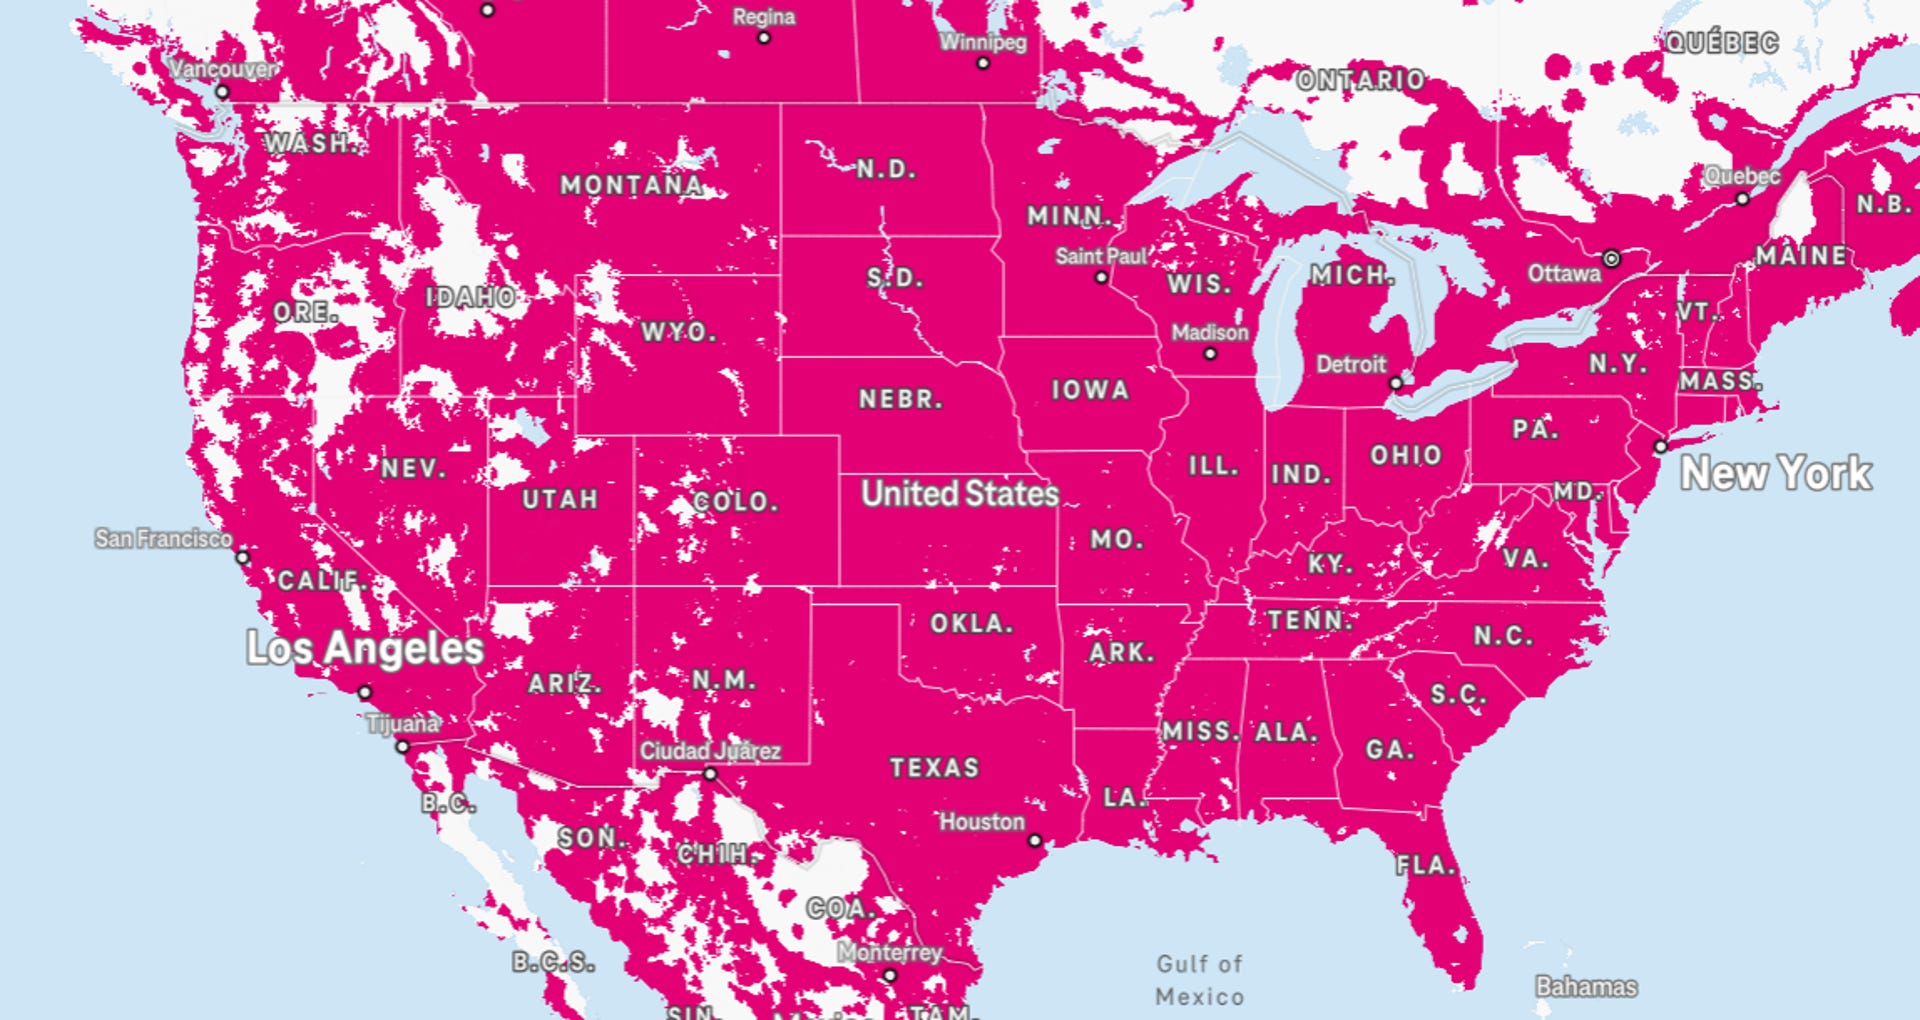 Map of USA with T-Mobile coverage marked in hot pink